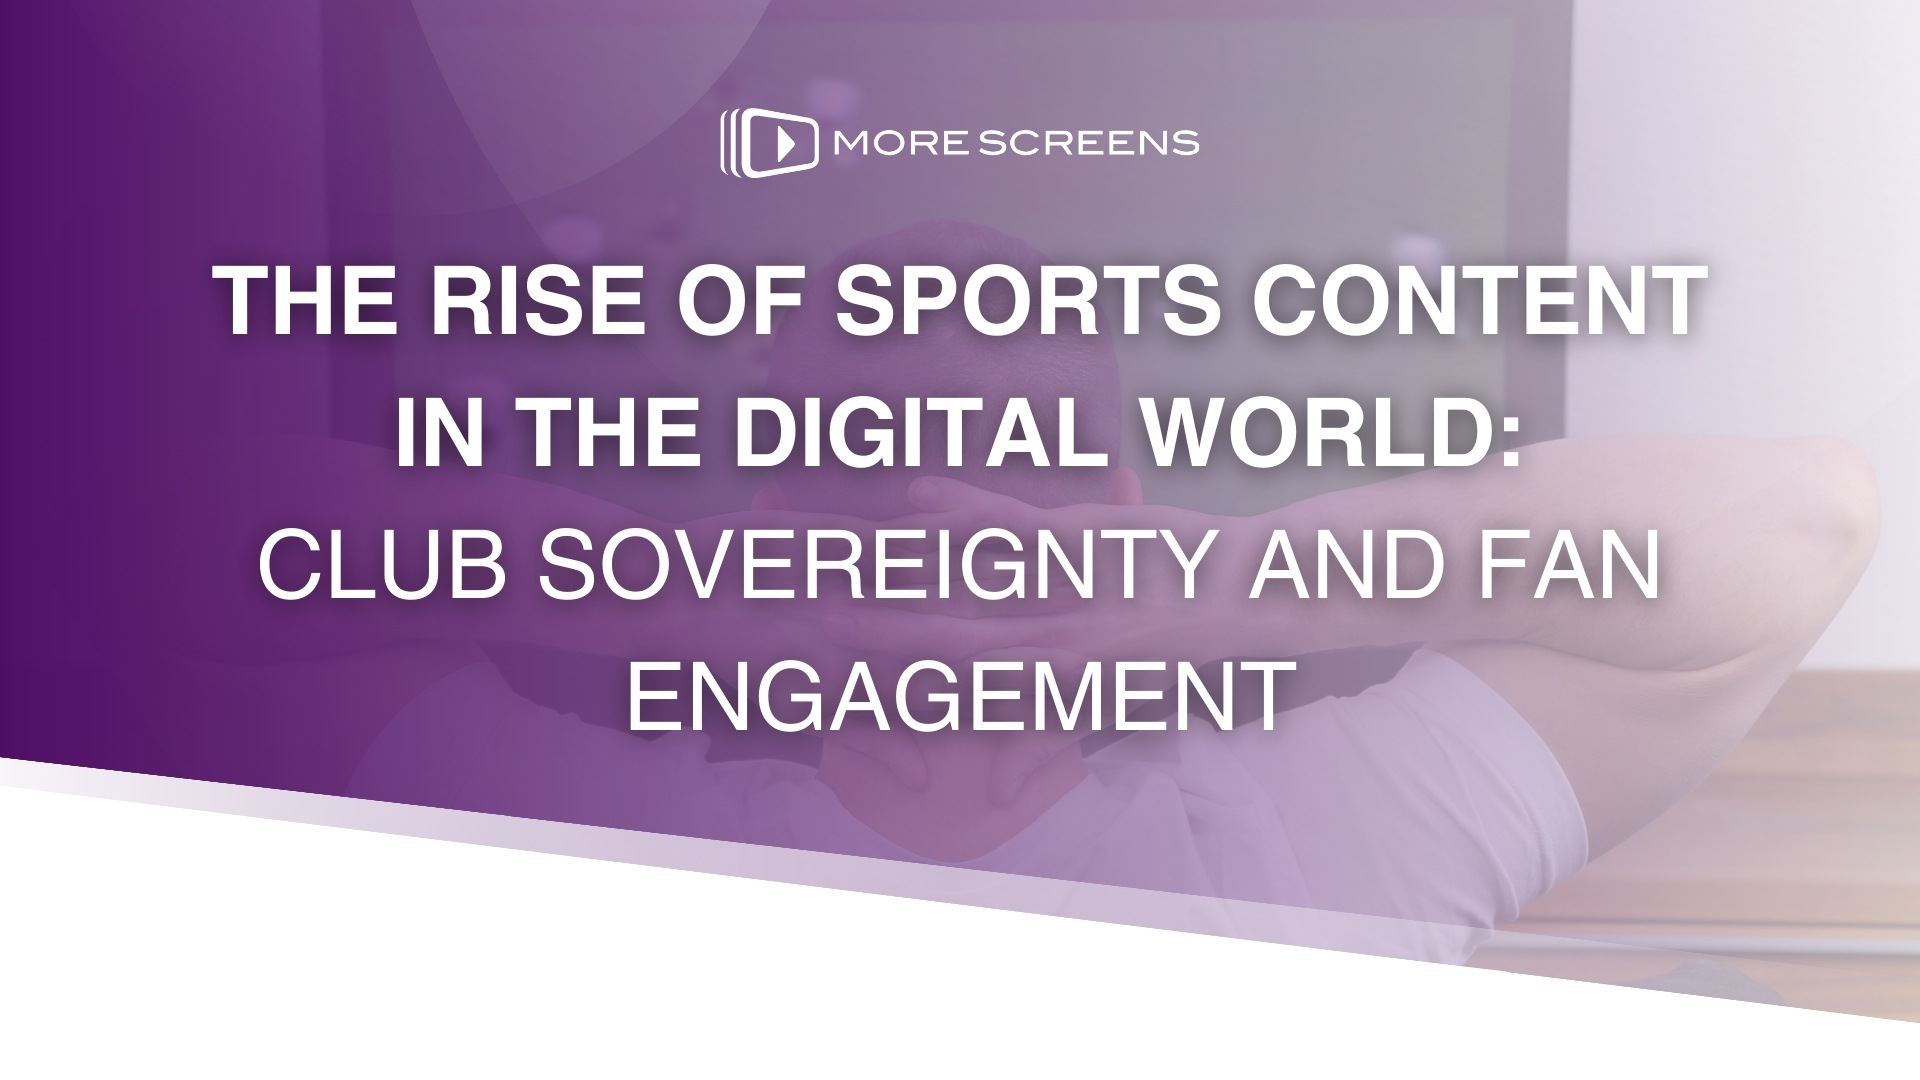 The Rise of Sports Content in the Digital World: Club Sovereignty and Fan Engagement